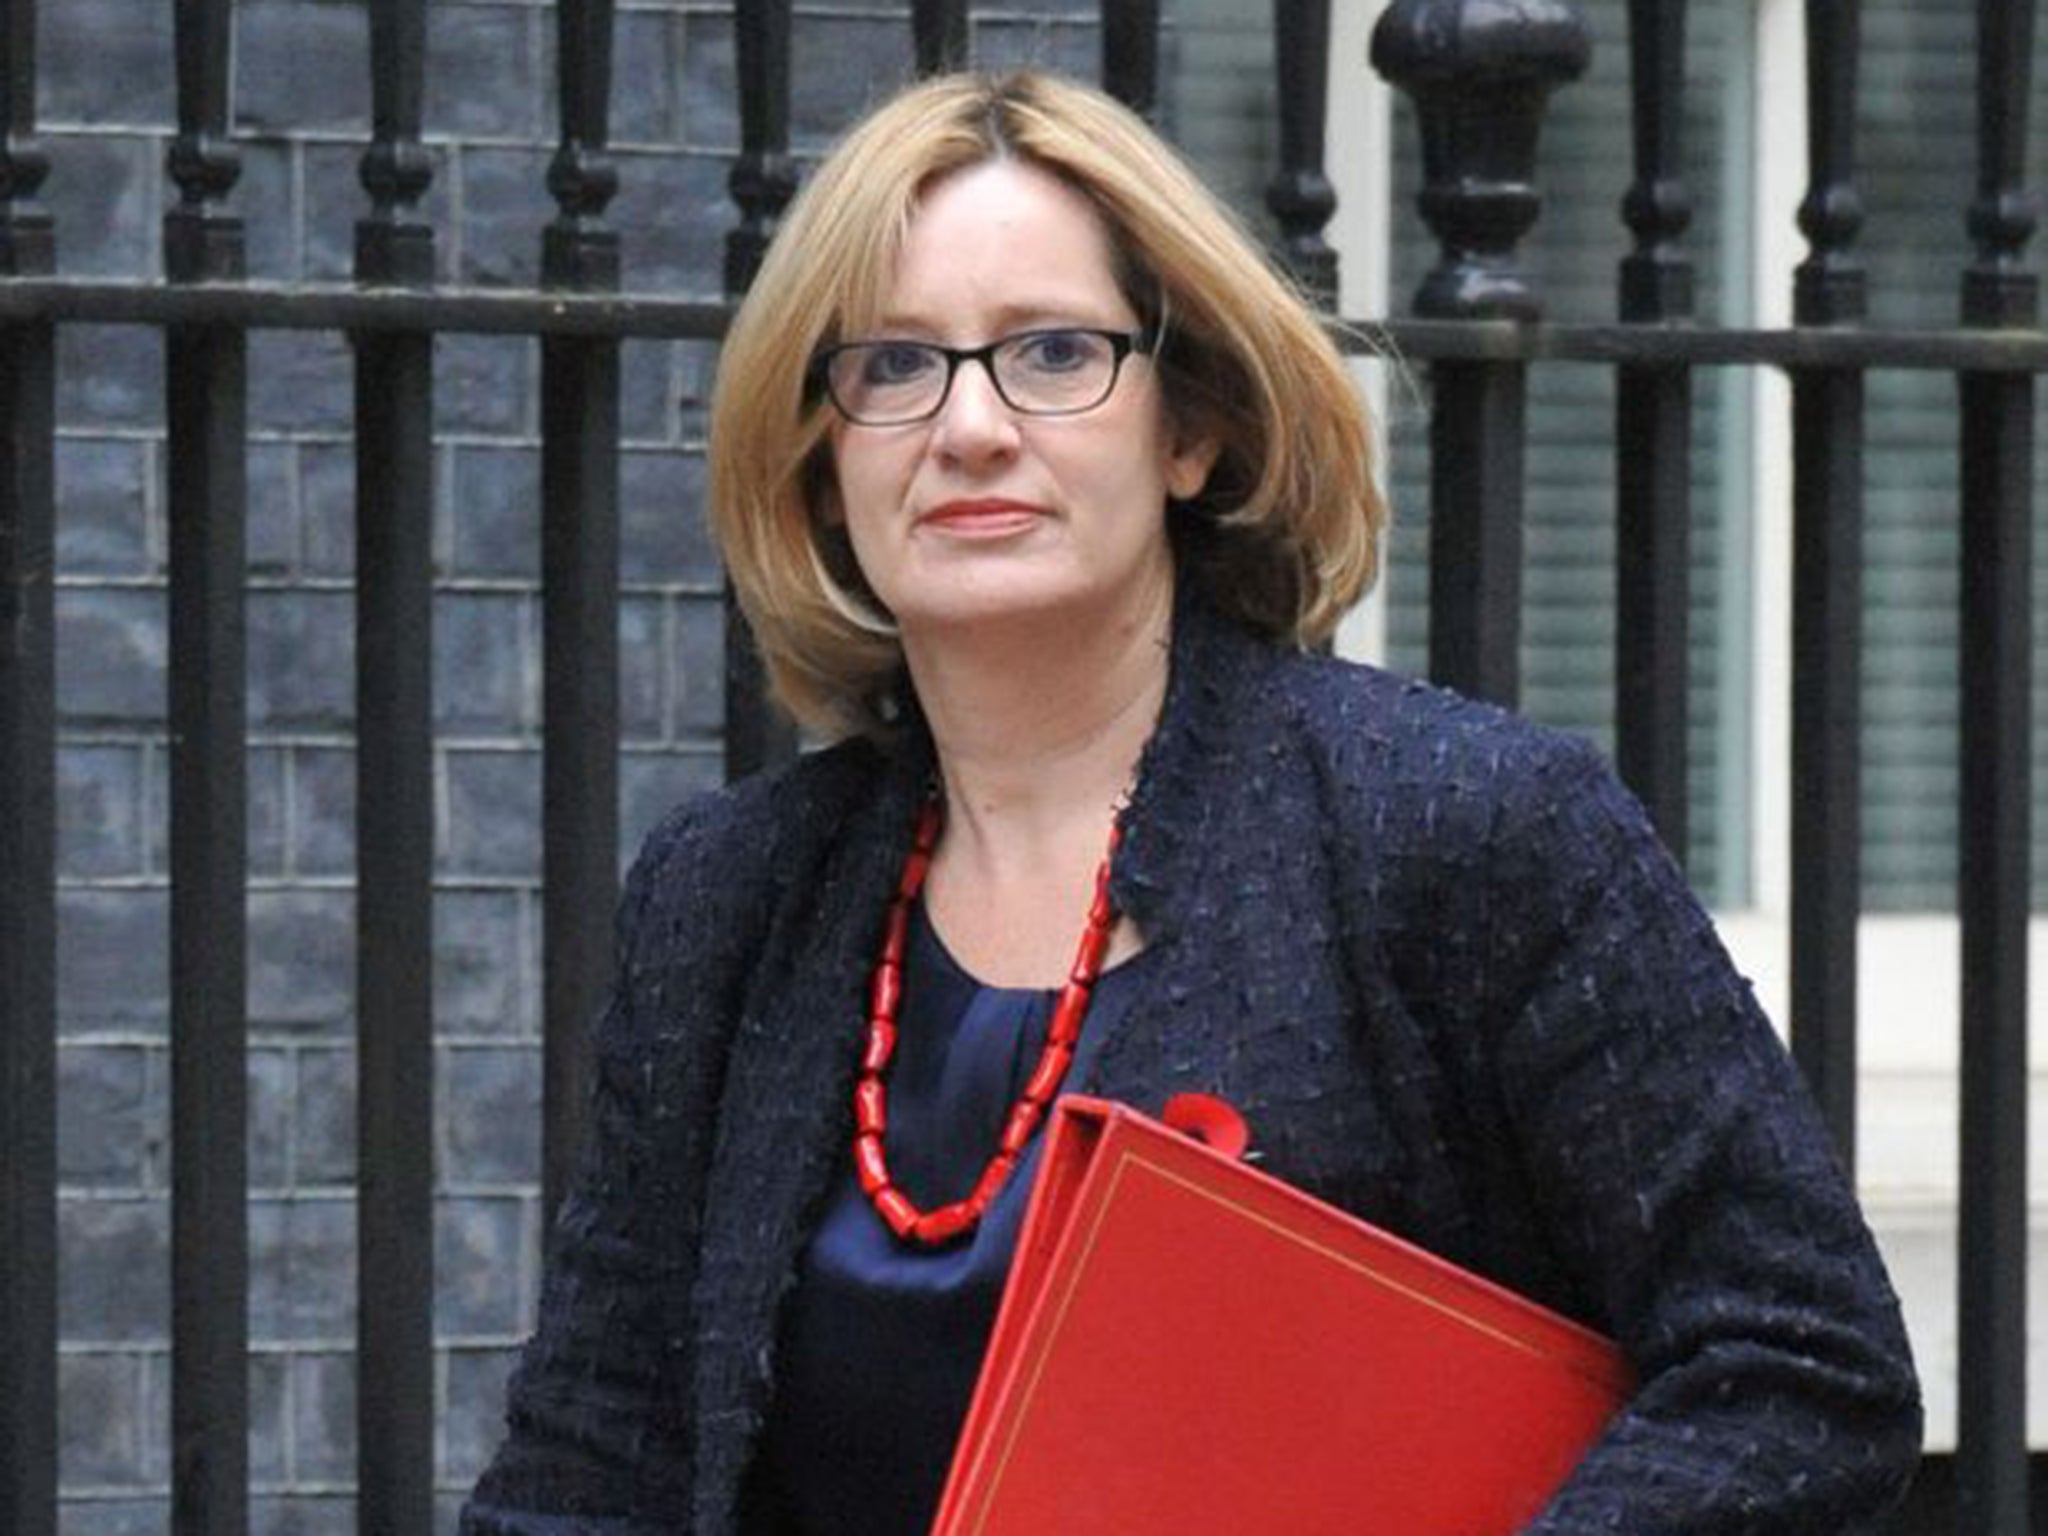 Amber Rudd's strategy was to attack two of the lowest cost energy sources (wind and solar) just as they were making progress towards being competitive with gas